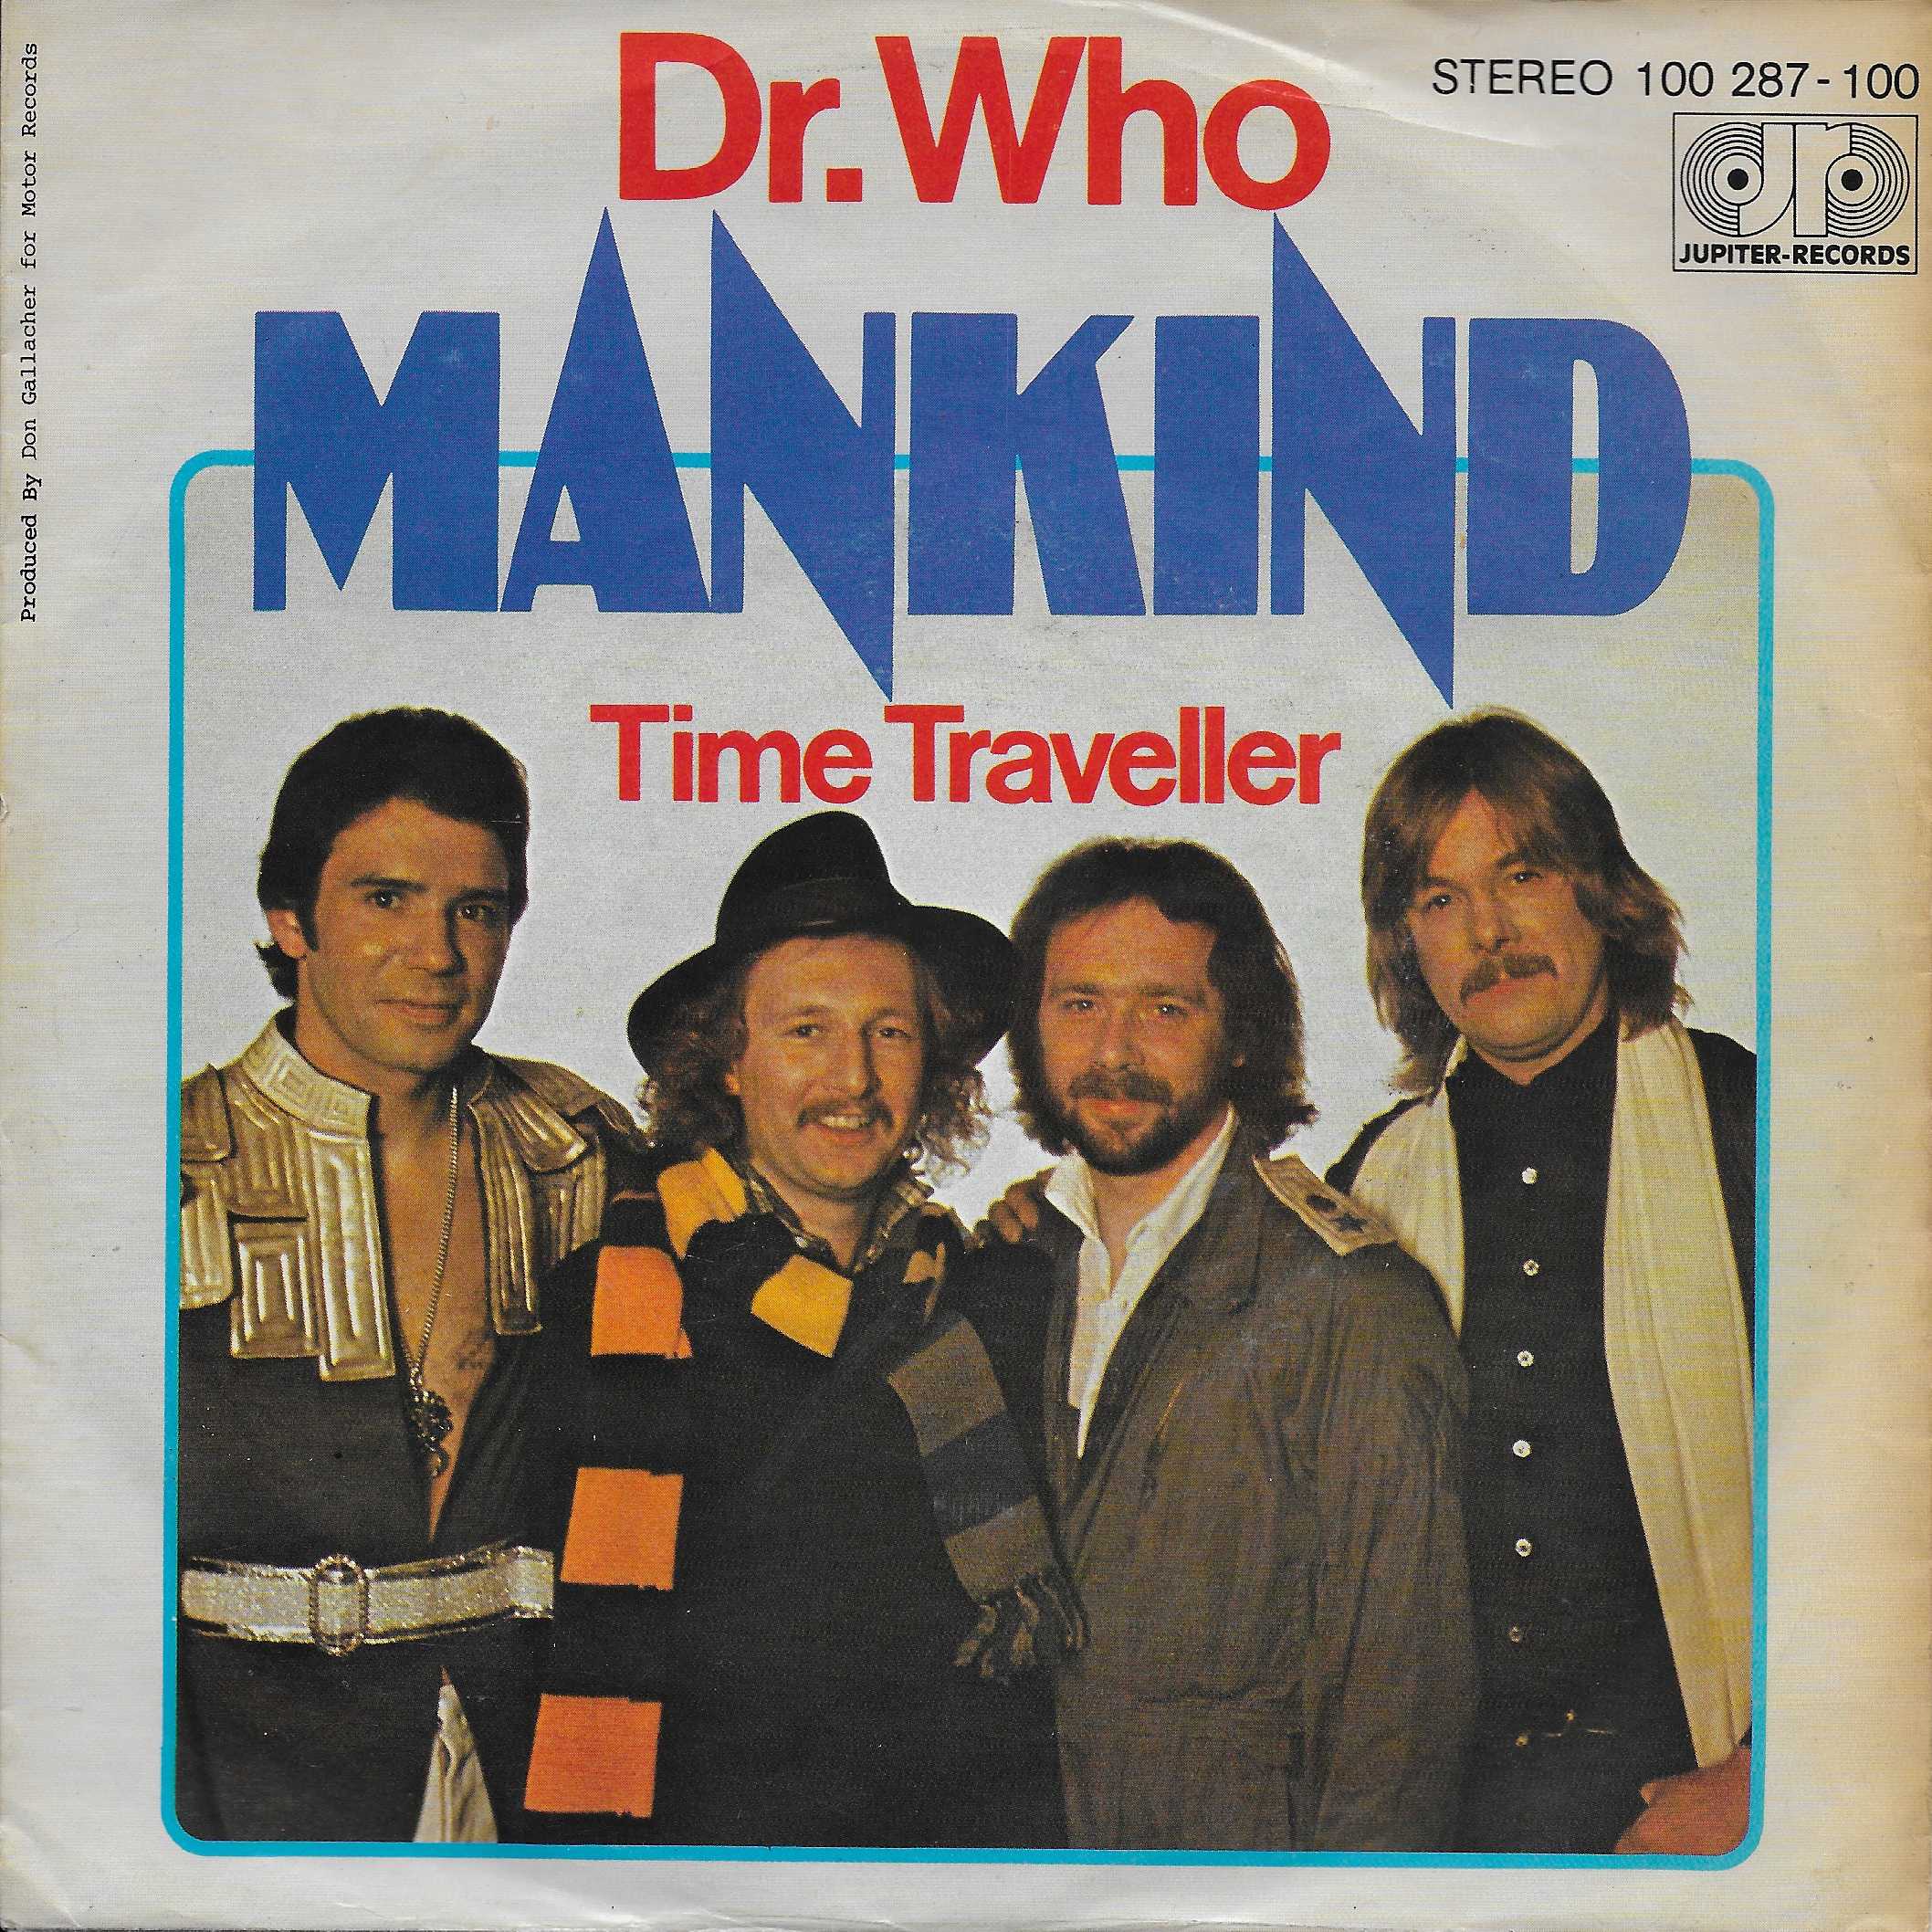 Picture of 100 287 Doctor Who ('Cosmic remix') - German import by artist Ron Grainer / Mark Stevens / Mankind from the BBC singles - Records and Tapes library